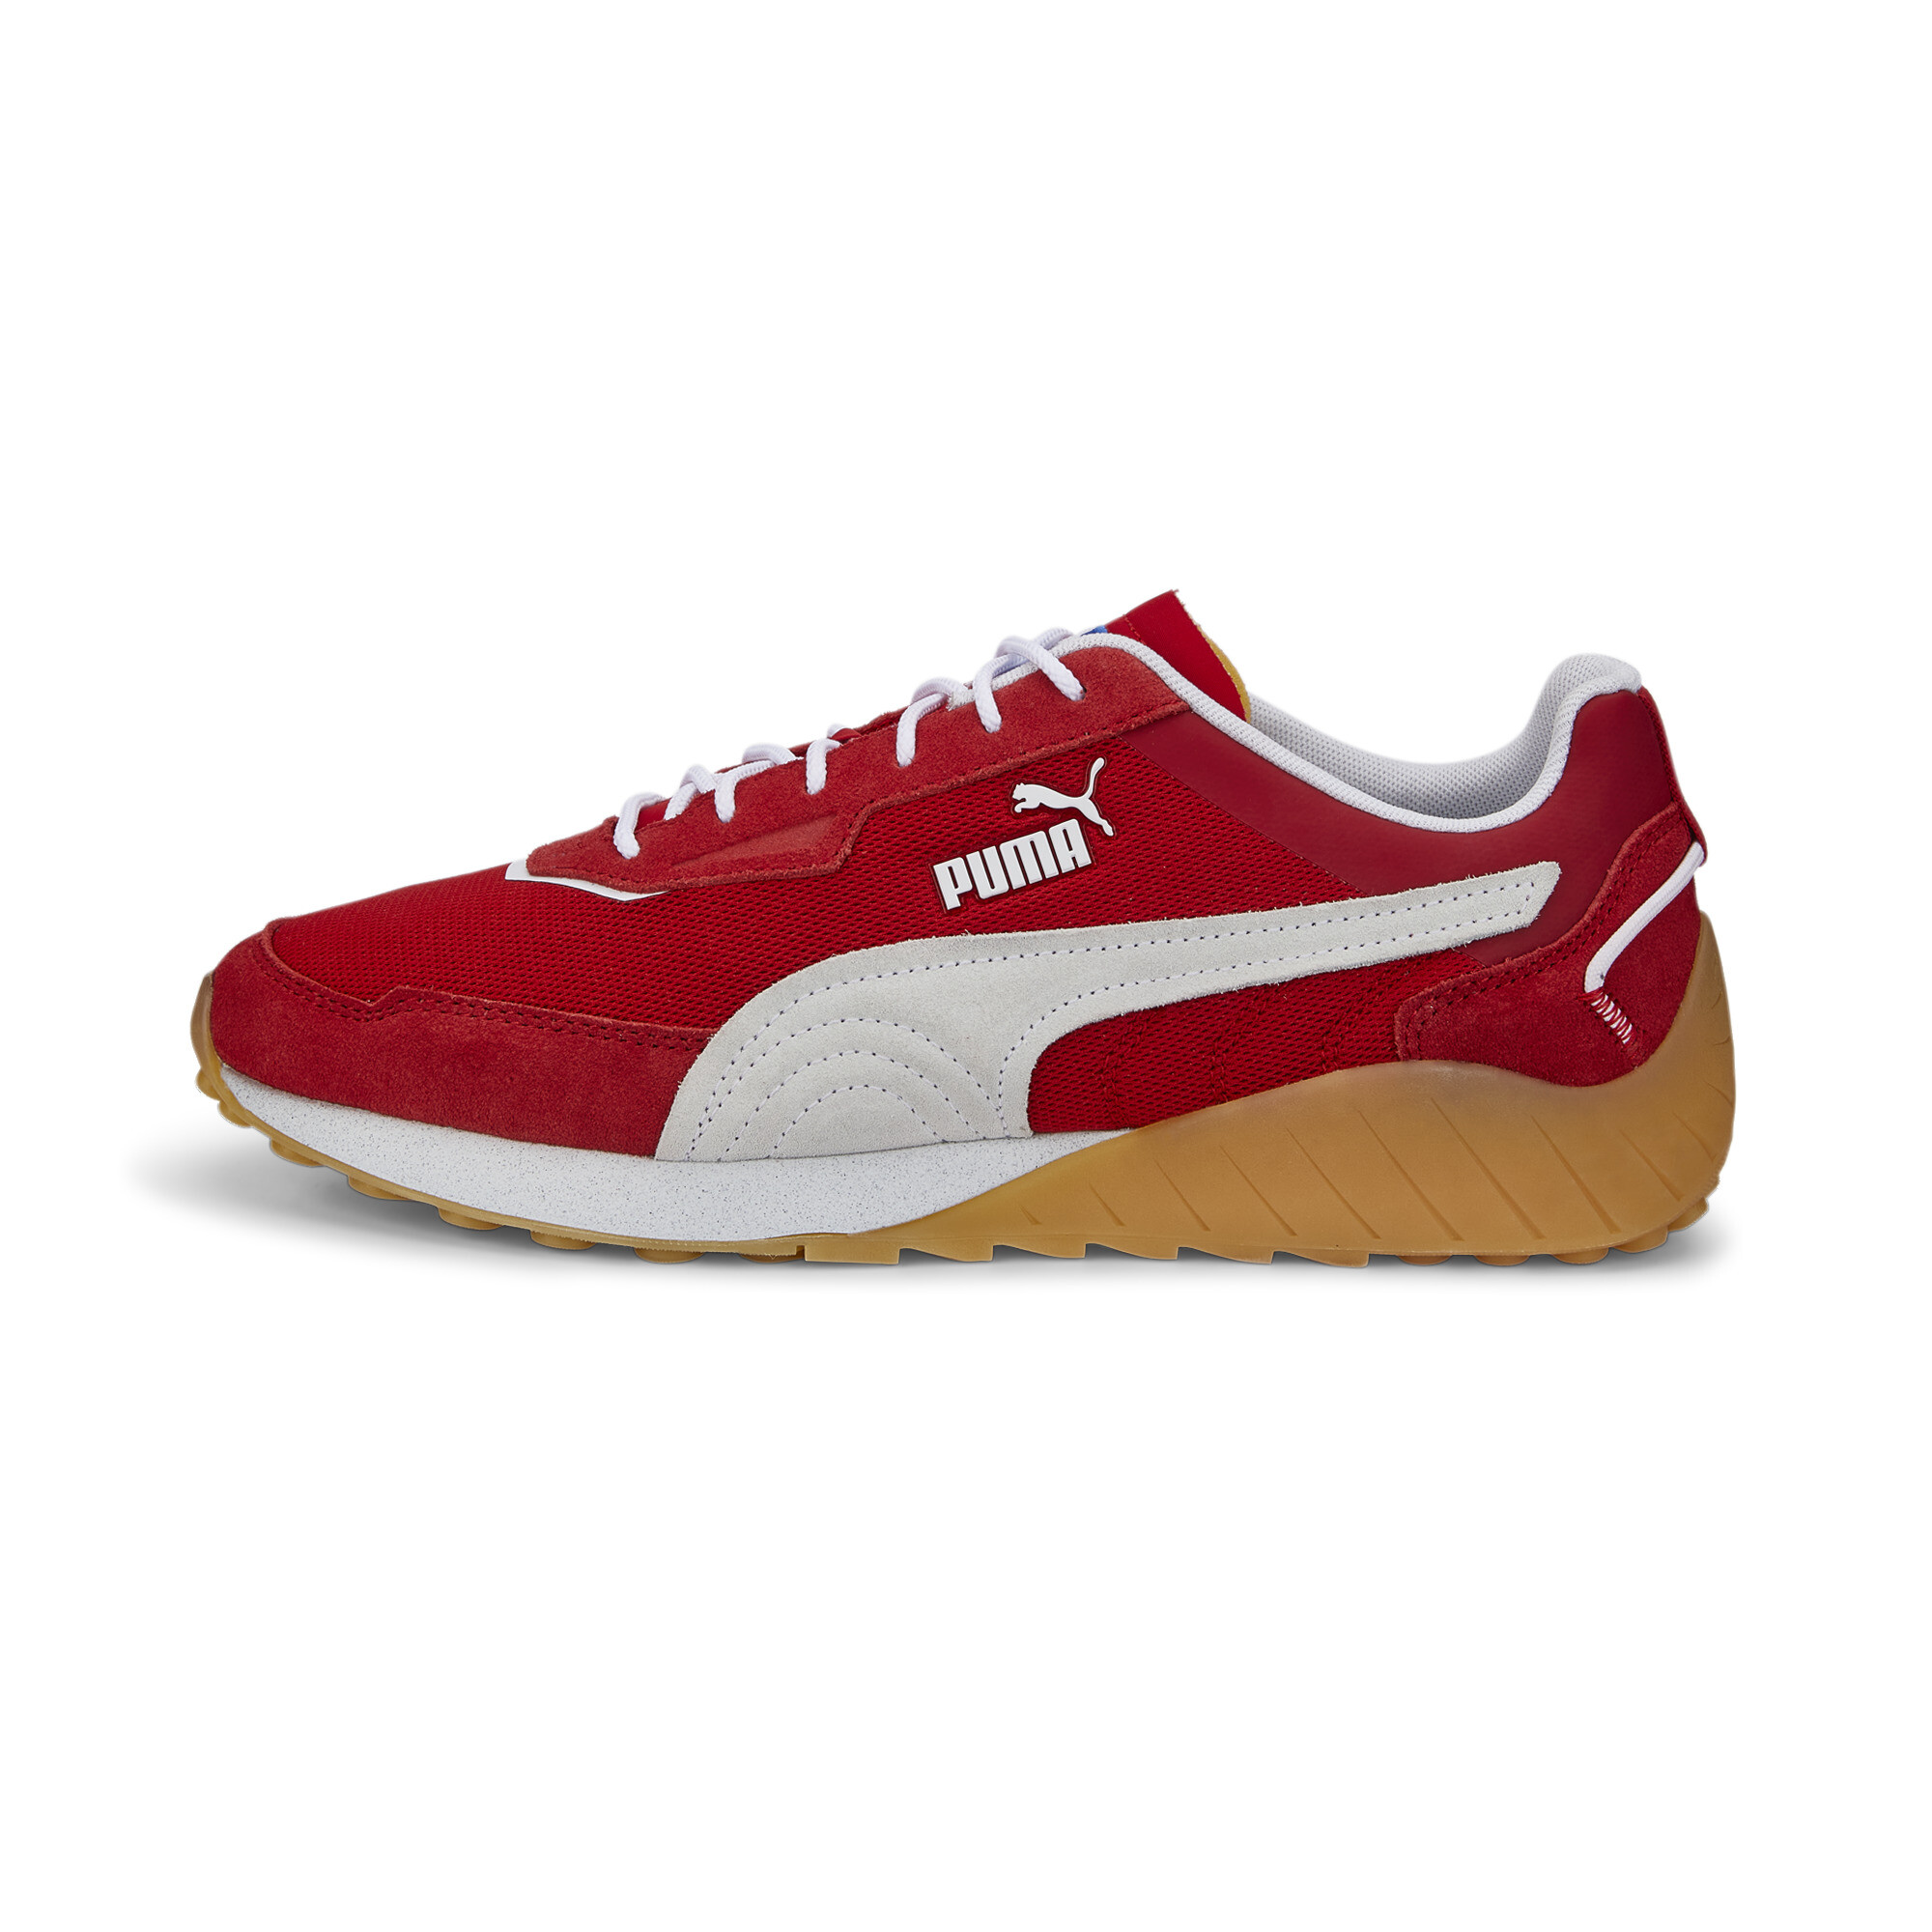 PUMA x SPARCO SPEEDFUSION Driving Sports Shoes Trainers Sneakers ...